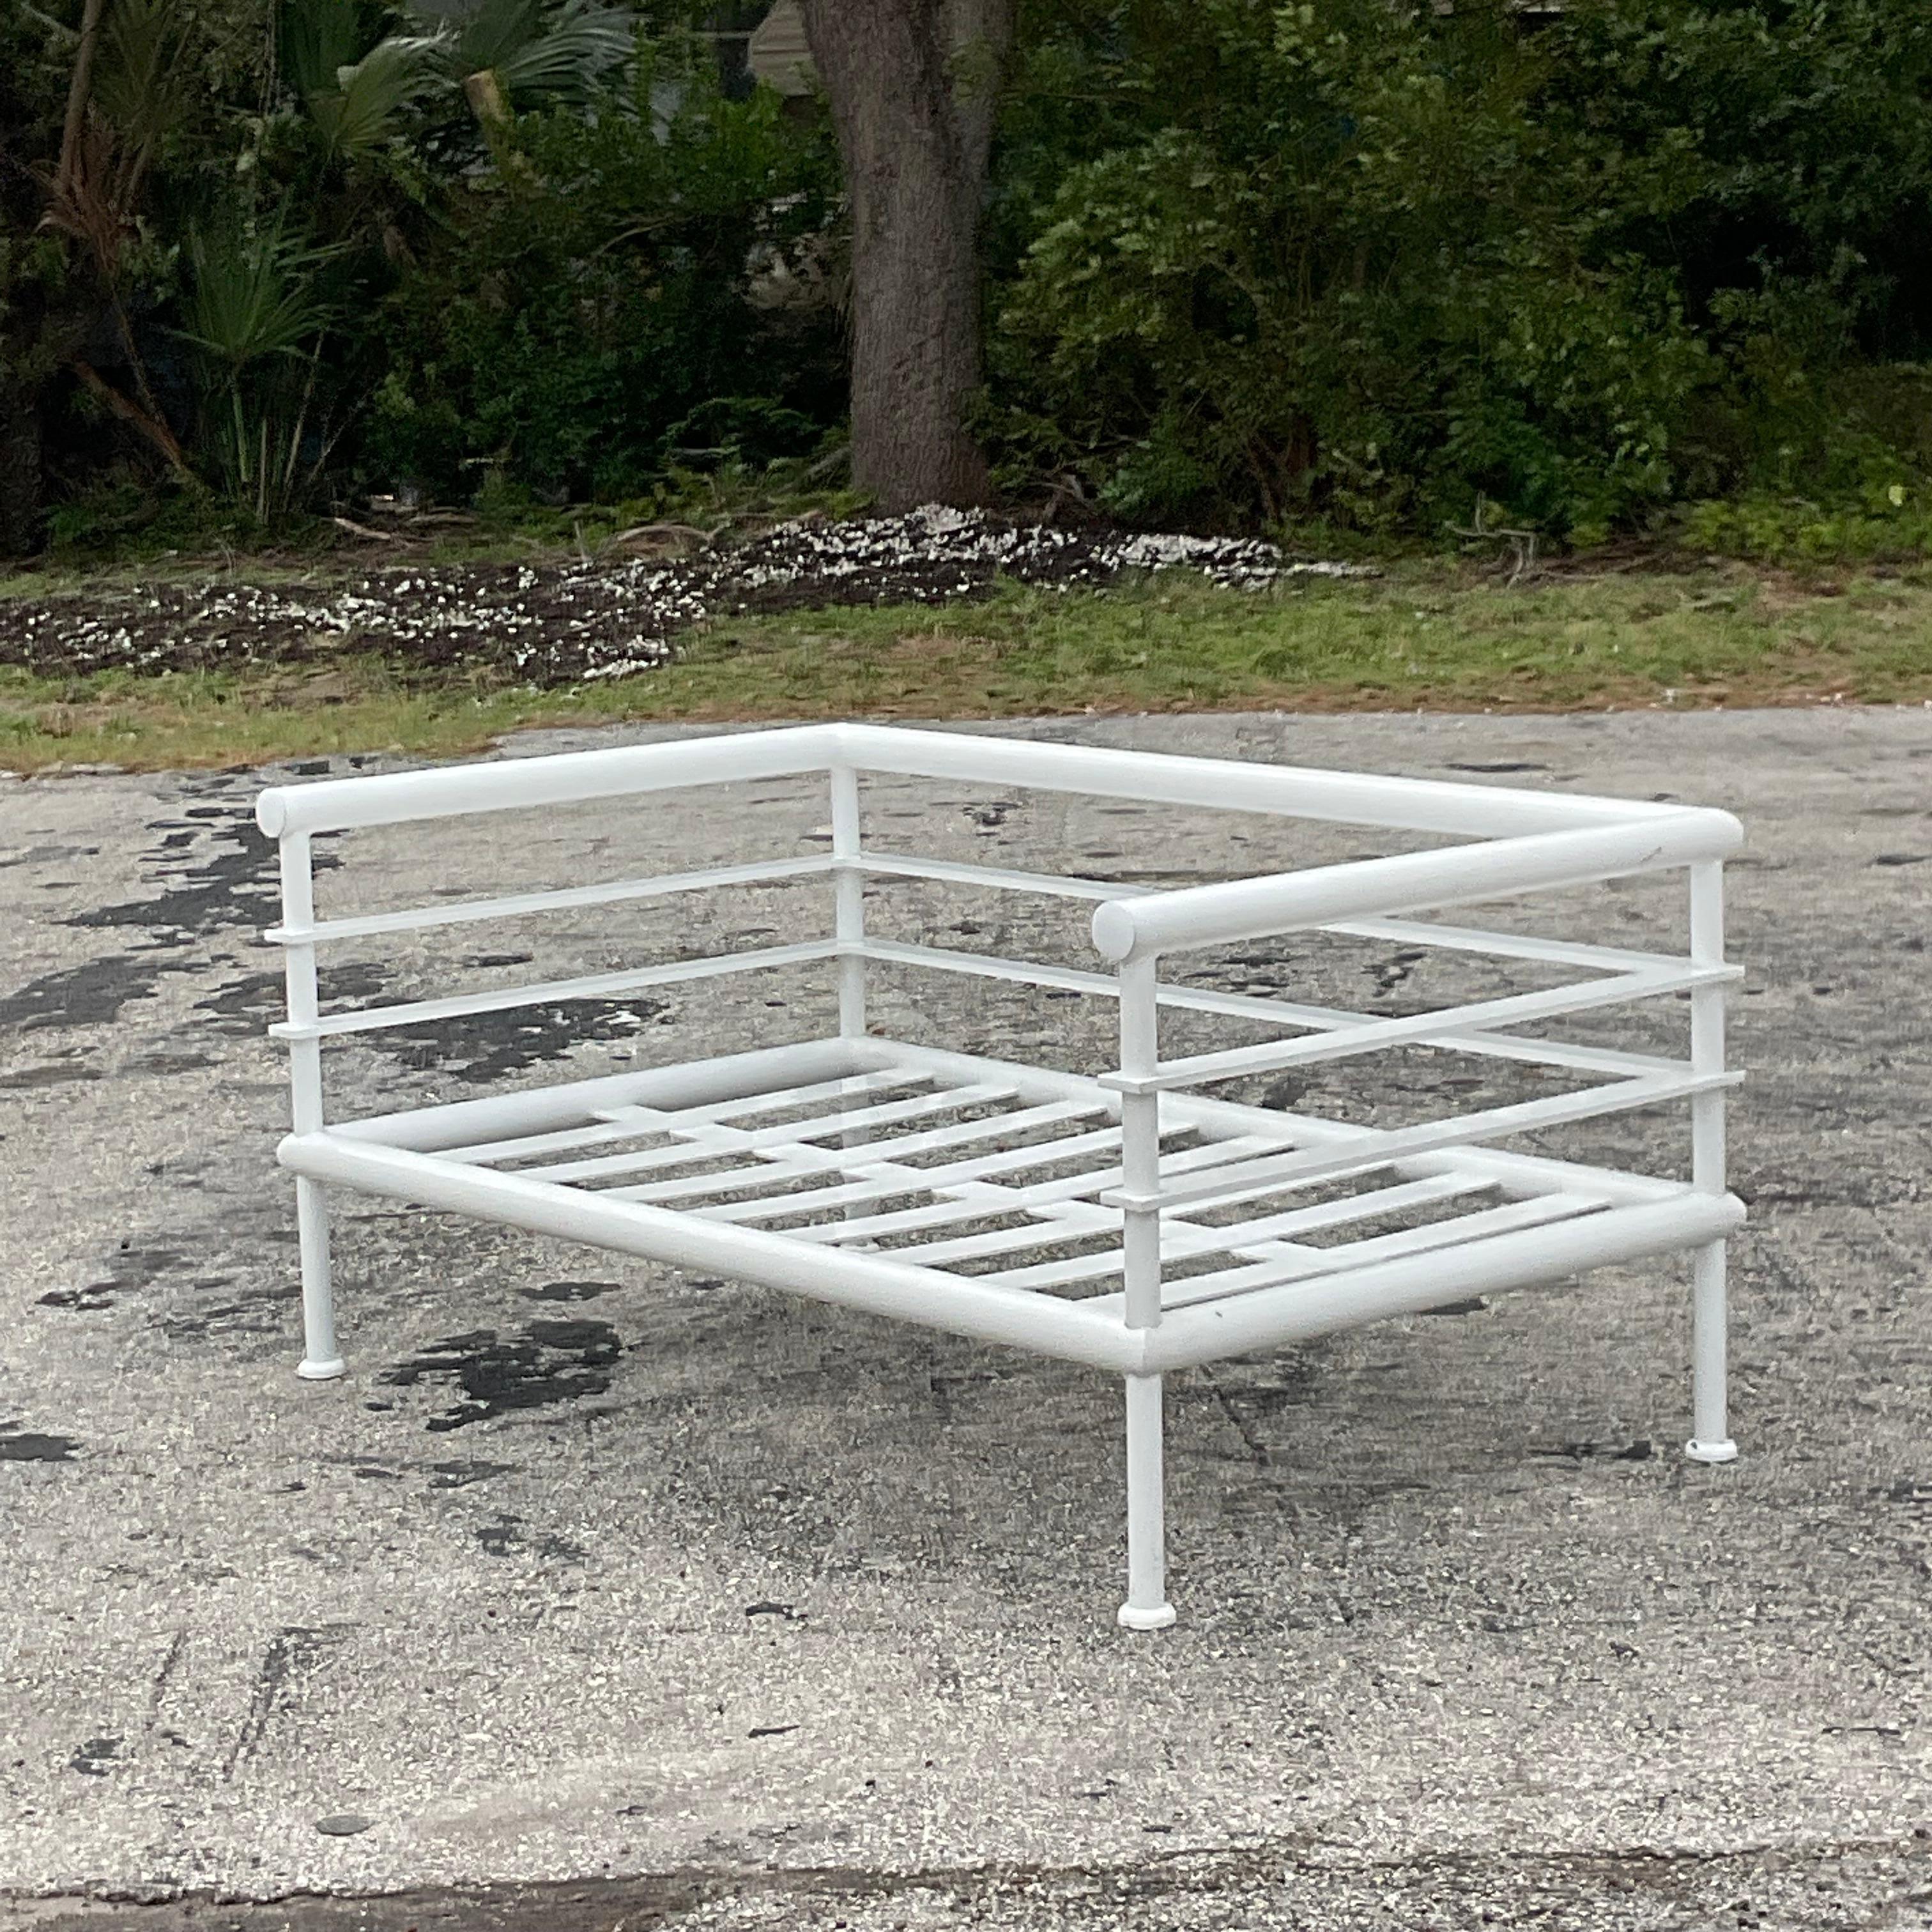 A stunning set of 4 vintage Coastal outdoor pieces. A chic sofa set that includes one sofa, two chairs and coordinating glass coffee table. Made by the exclusive French brand Hugonet and tagged on the back. A painted aluminum tubular frame